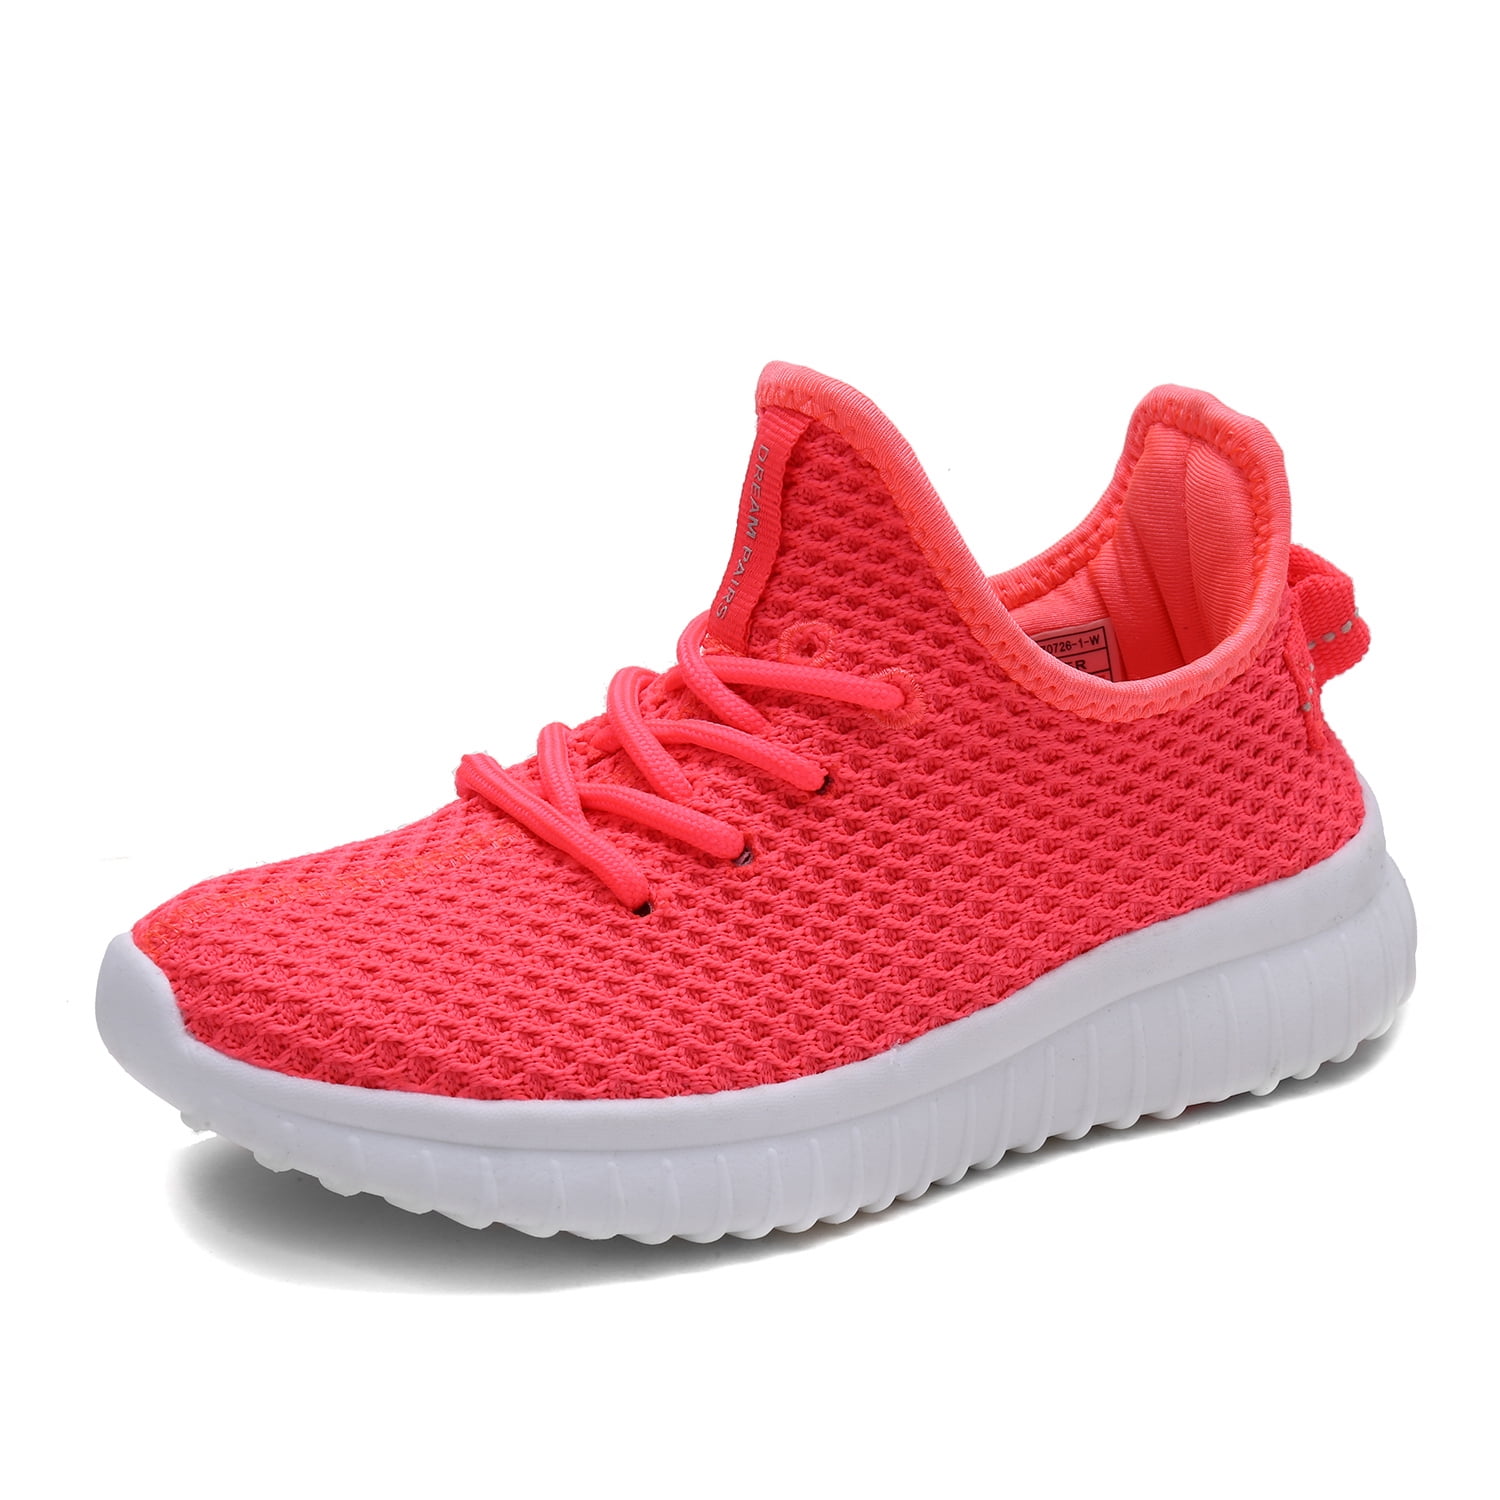 DREAM PAIRS Womens Fashion Breathable Sneakers Mesh Sports Casual ...